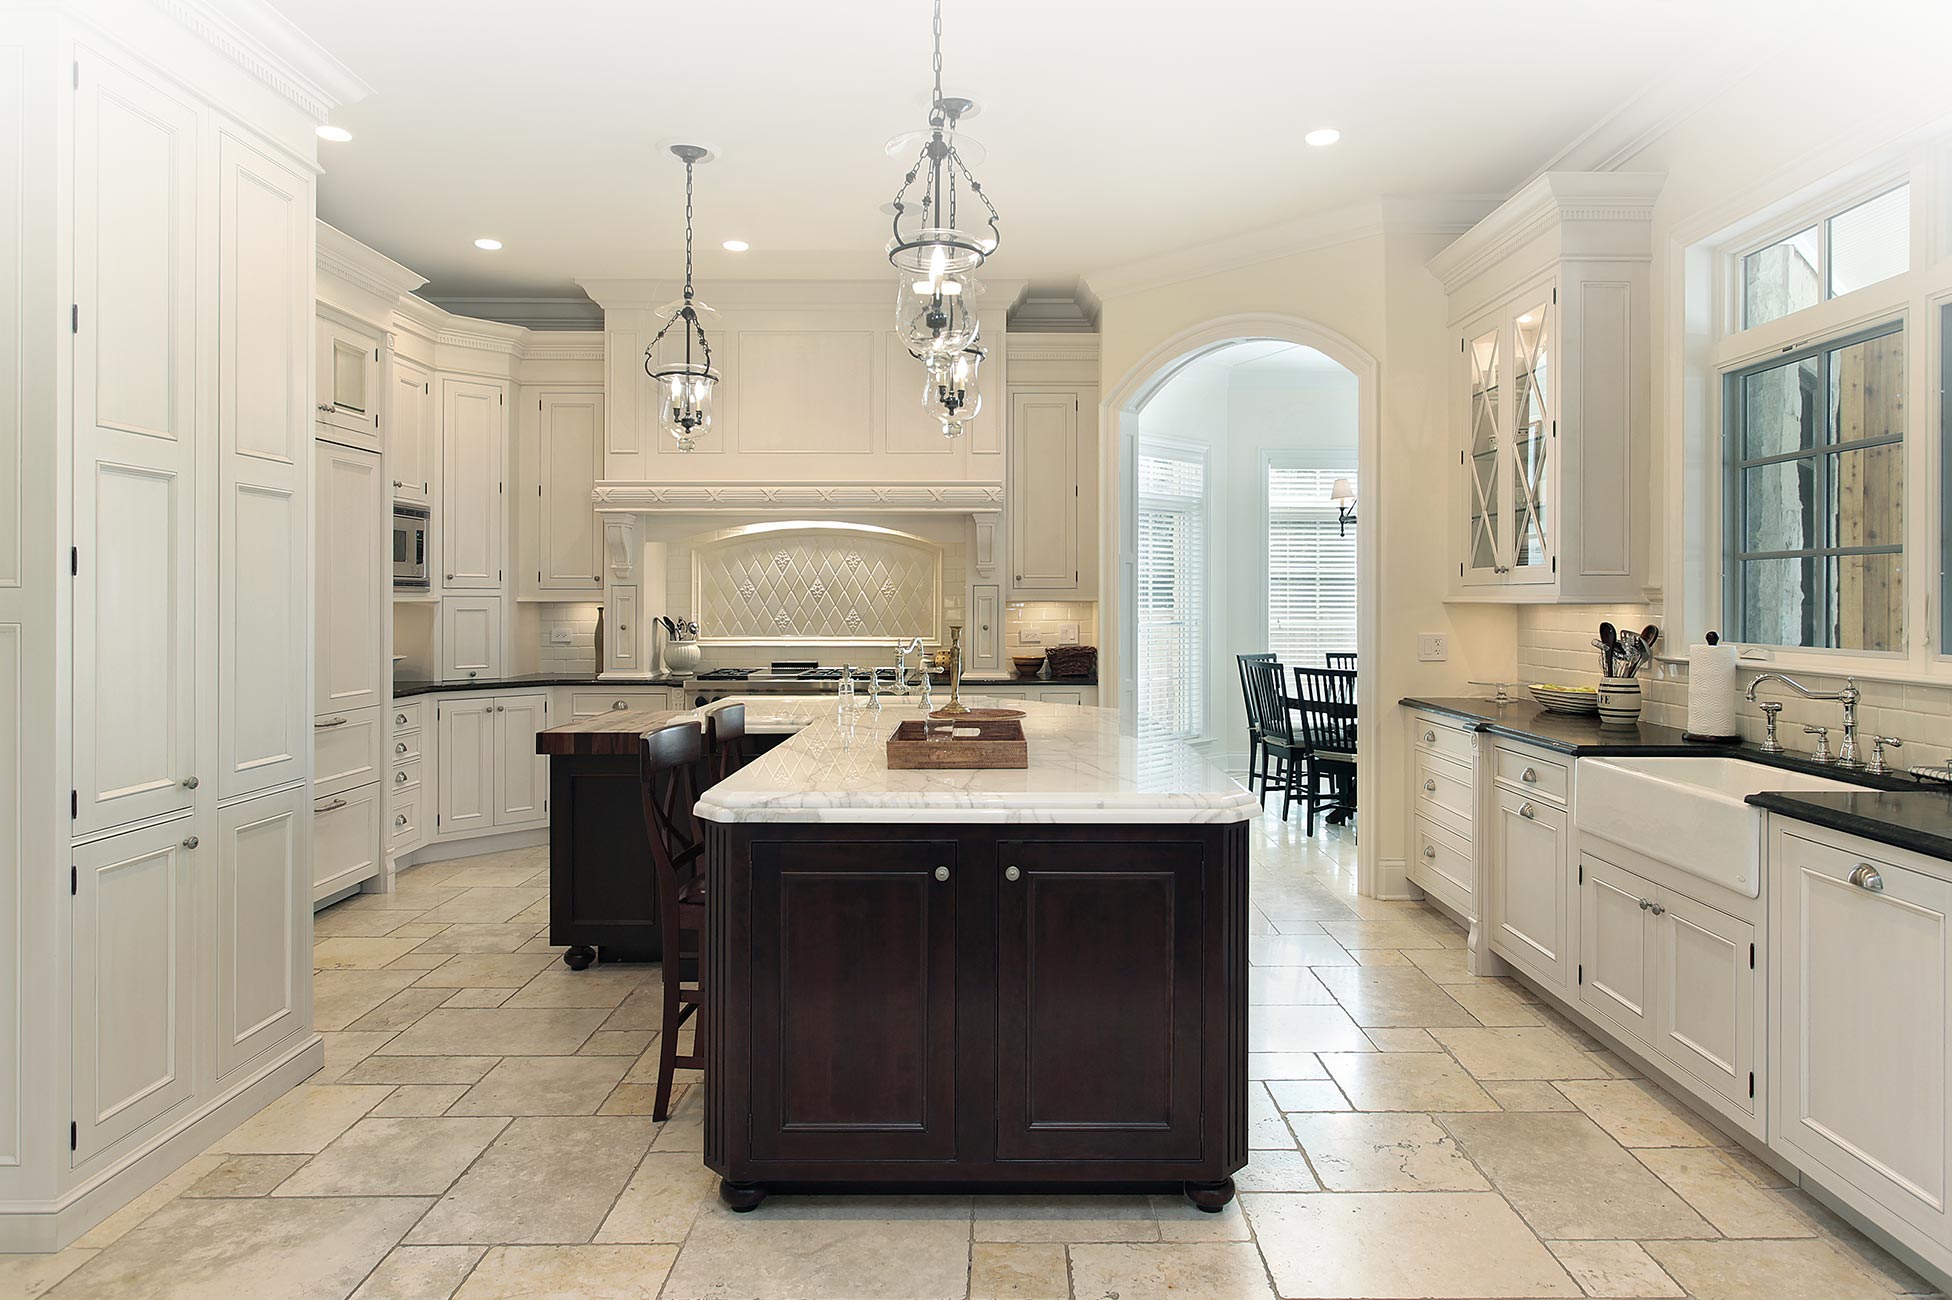 An Elegant Kitchen with Functionality